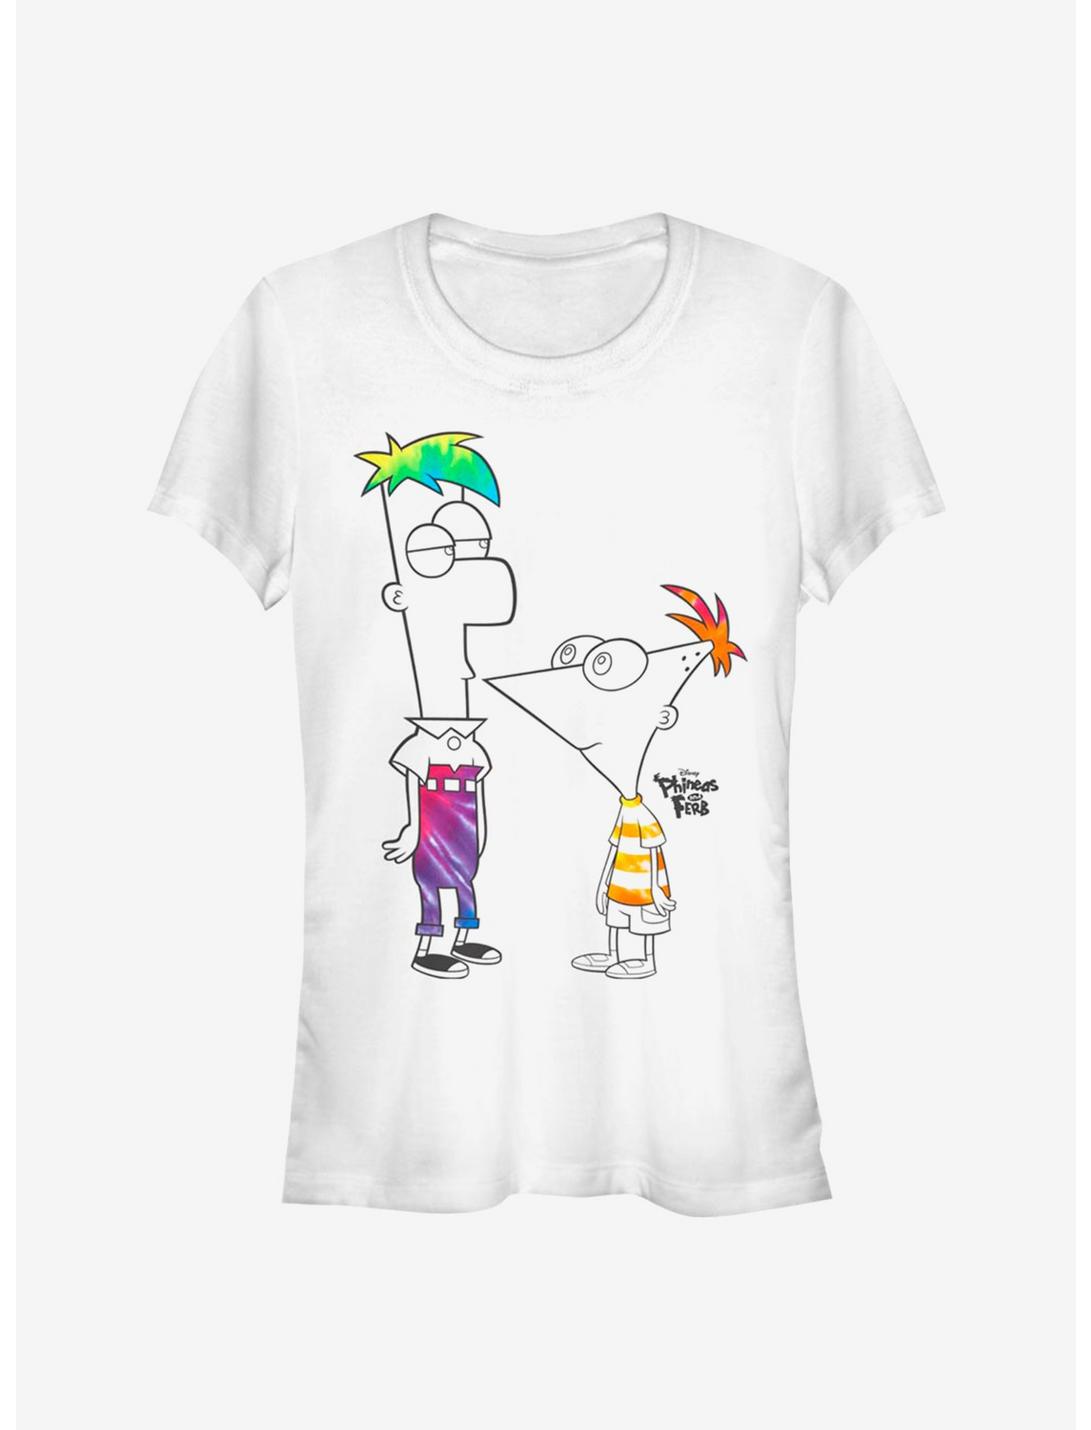 Disney Phineas And Ferb Boys Of Tie Dye Girls T-Shirt, WHITE, hi-res